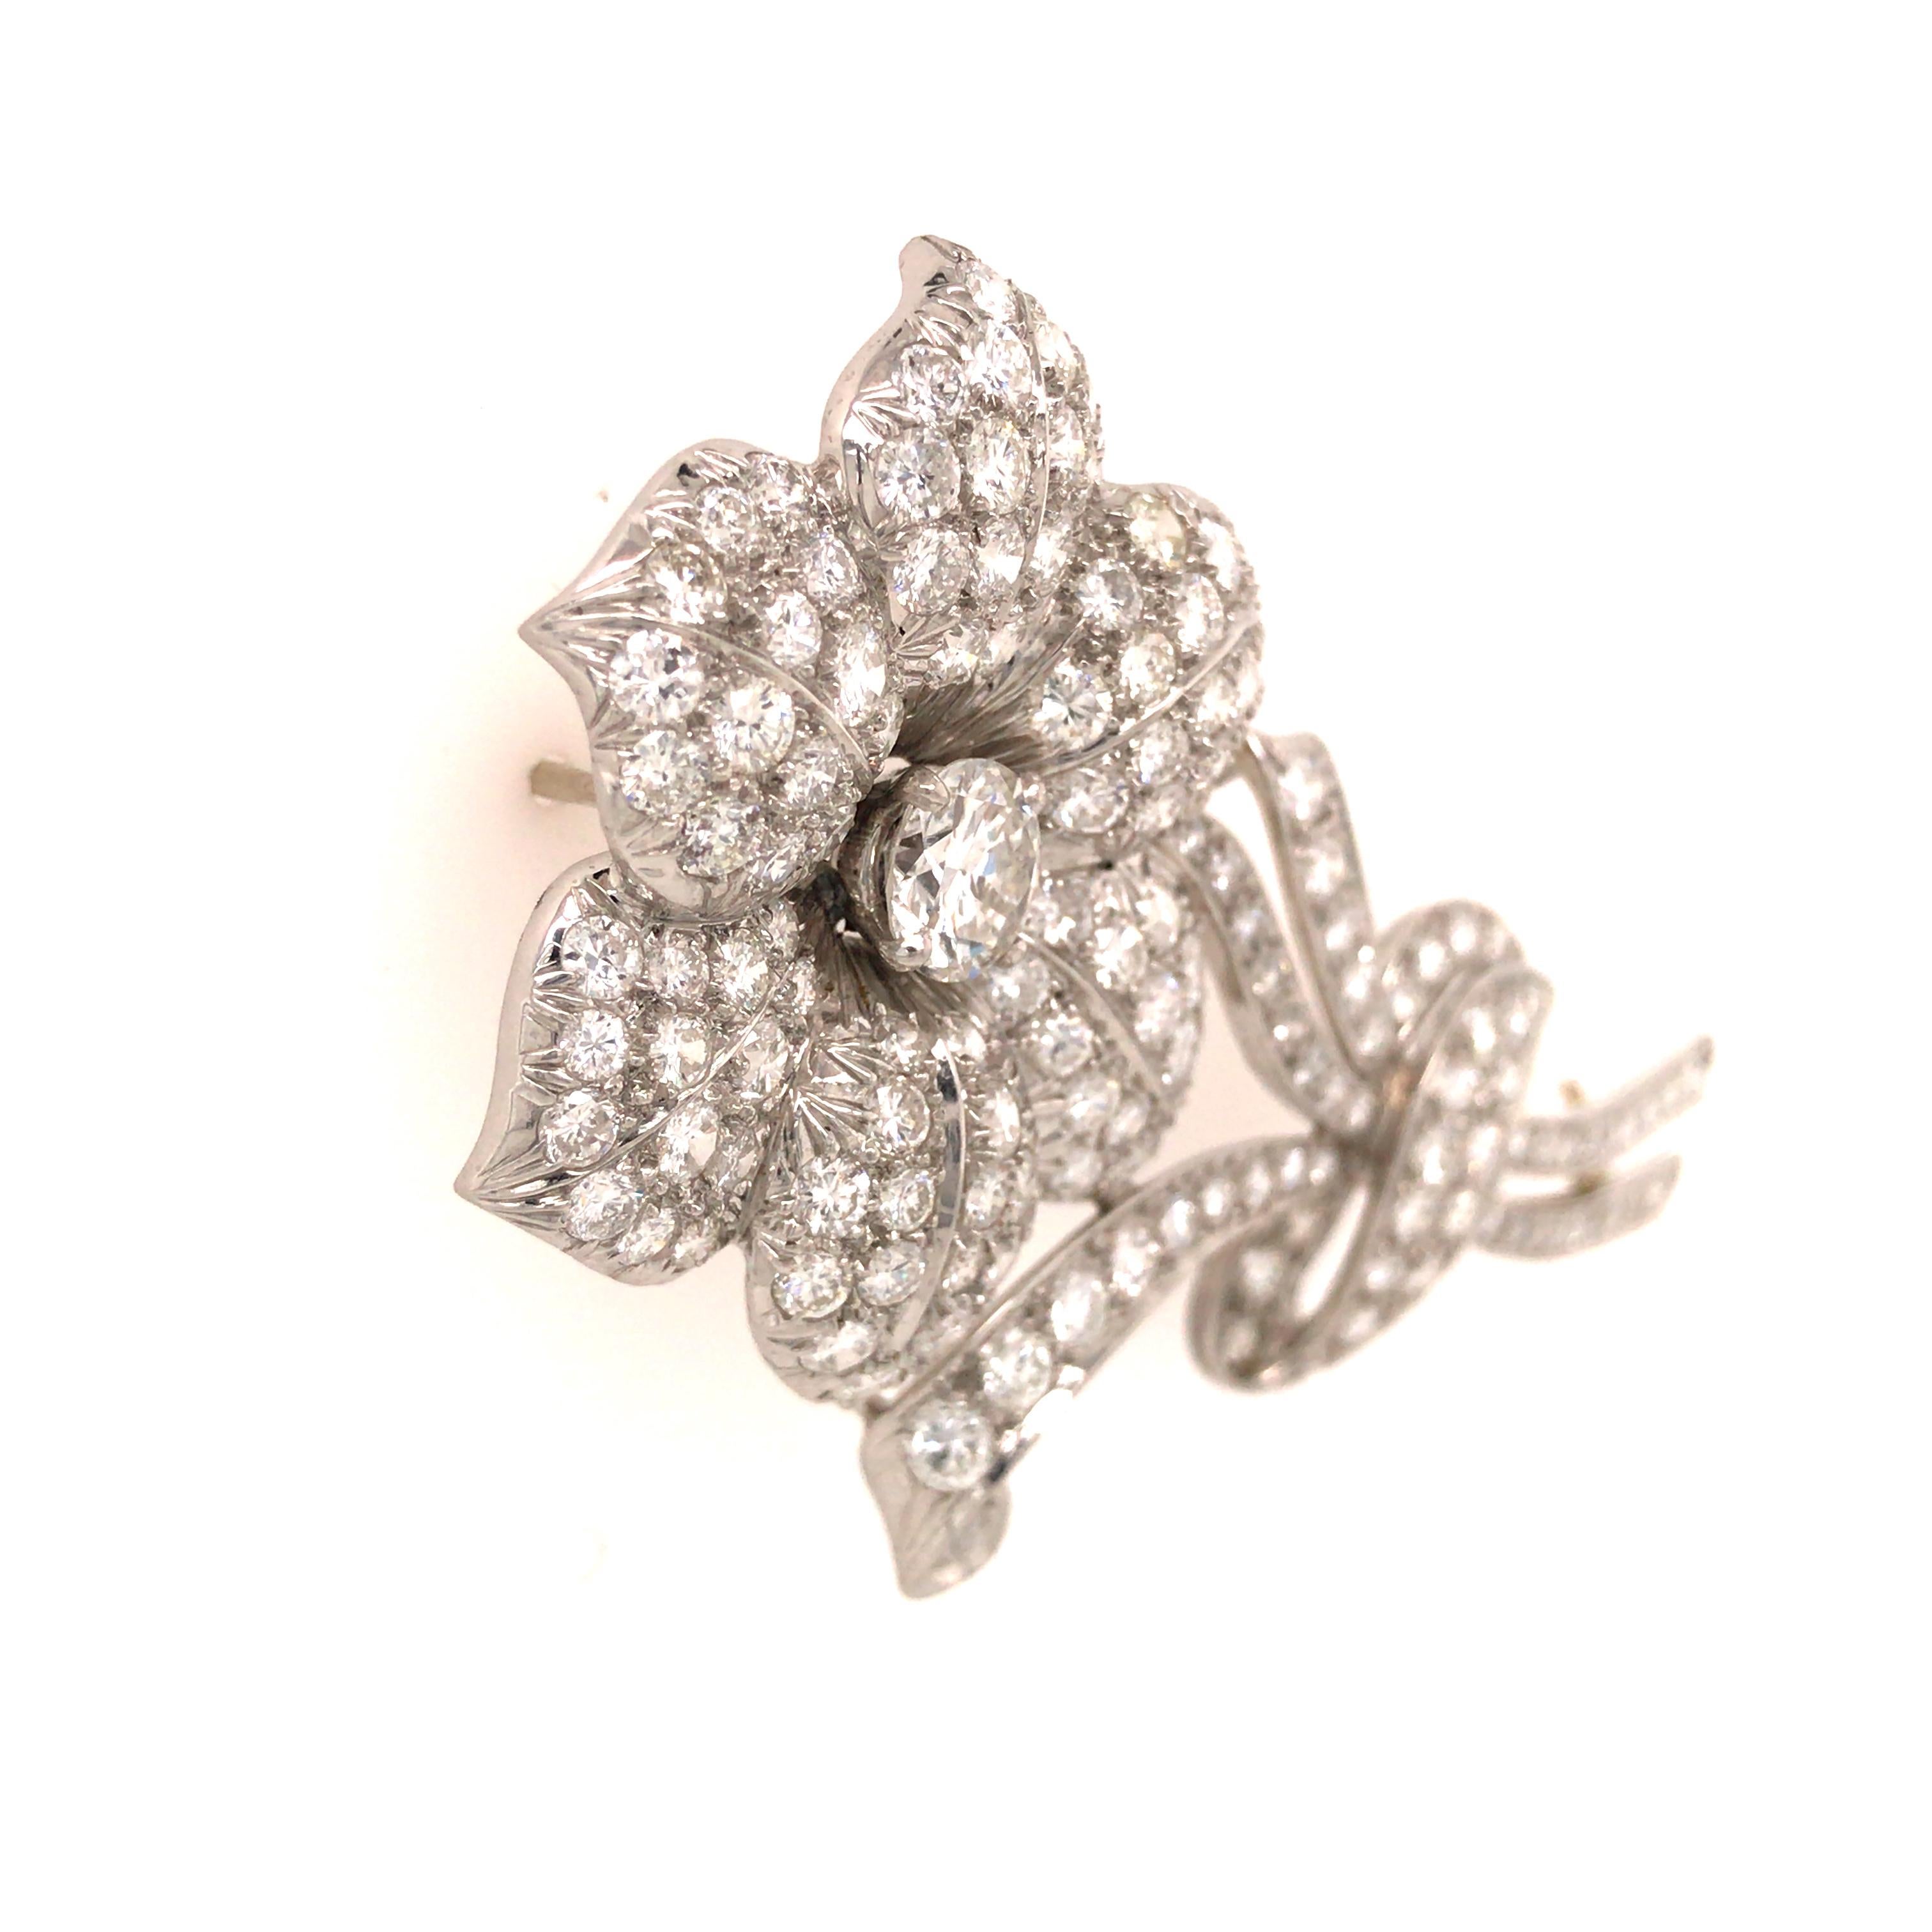 Maurice Tishman Diamond Flower Pin in Platinum.  Round Brilliant Cut Diamonds weighing approximately 8 carat total weight, G-H in color and VS-SI in clarity are expertly set.  The Pin measures 2 5/8 inch in length and 1 1/4 inch at the widest point.